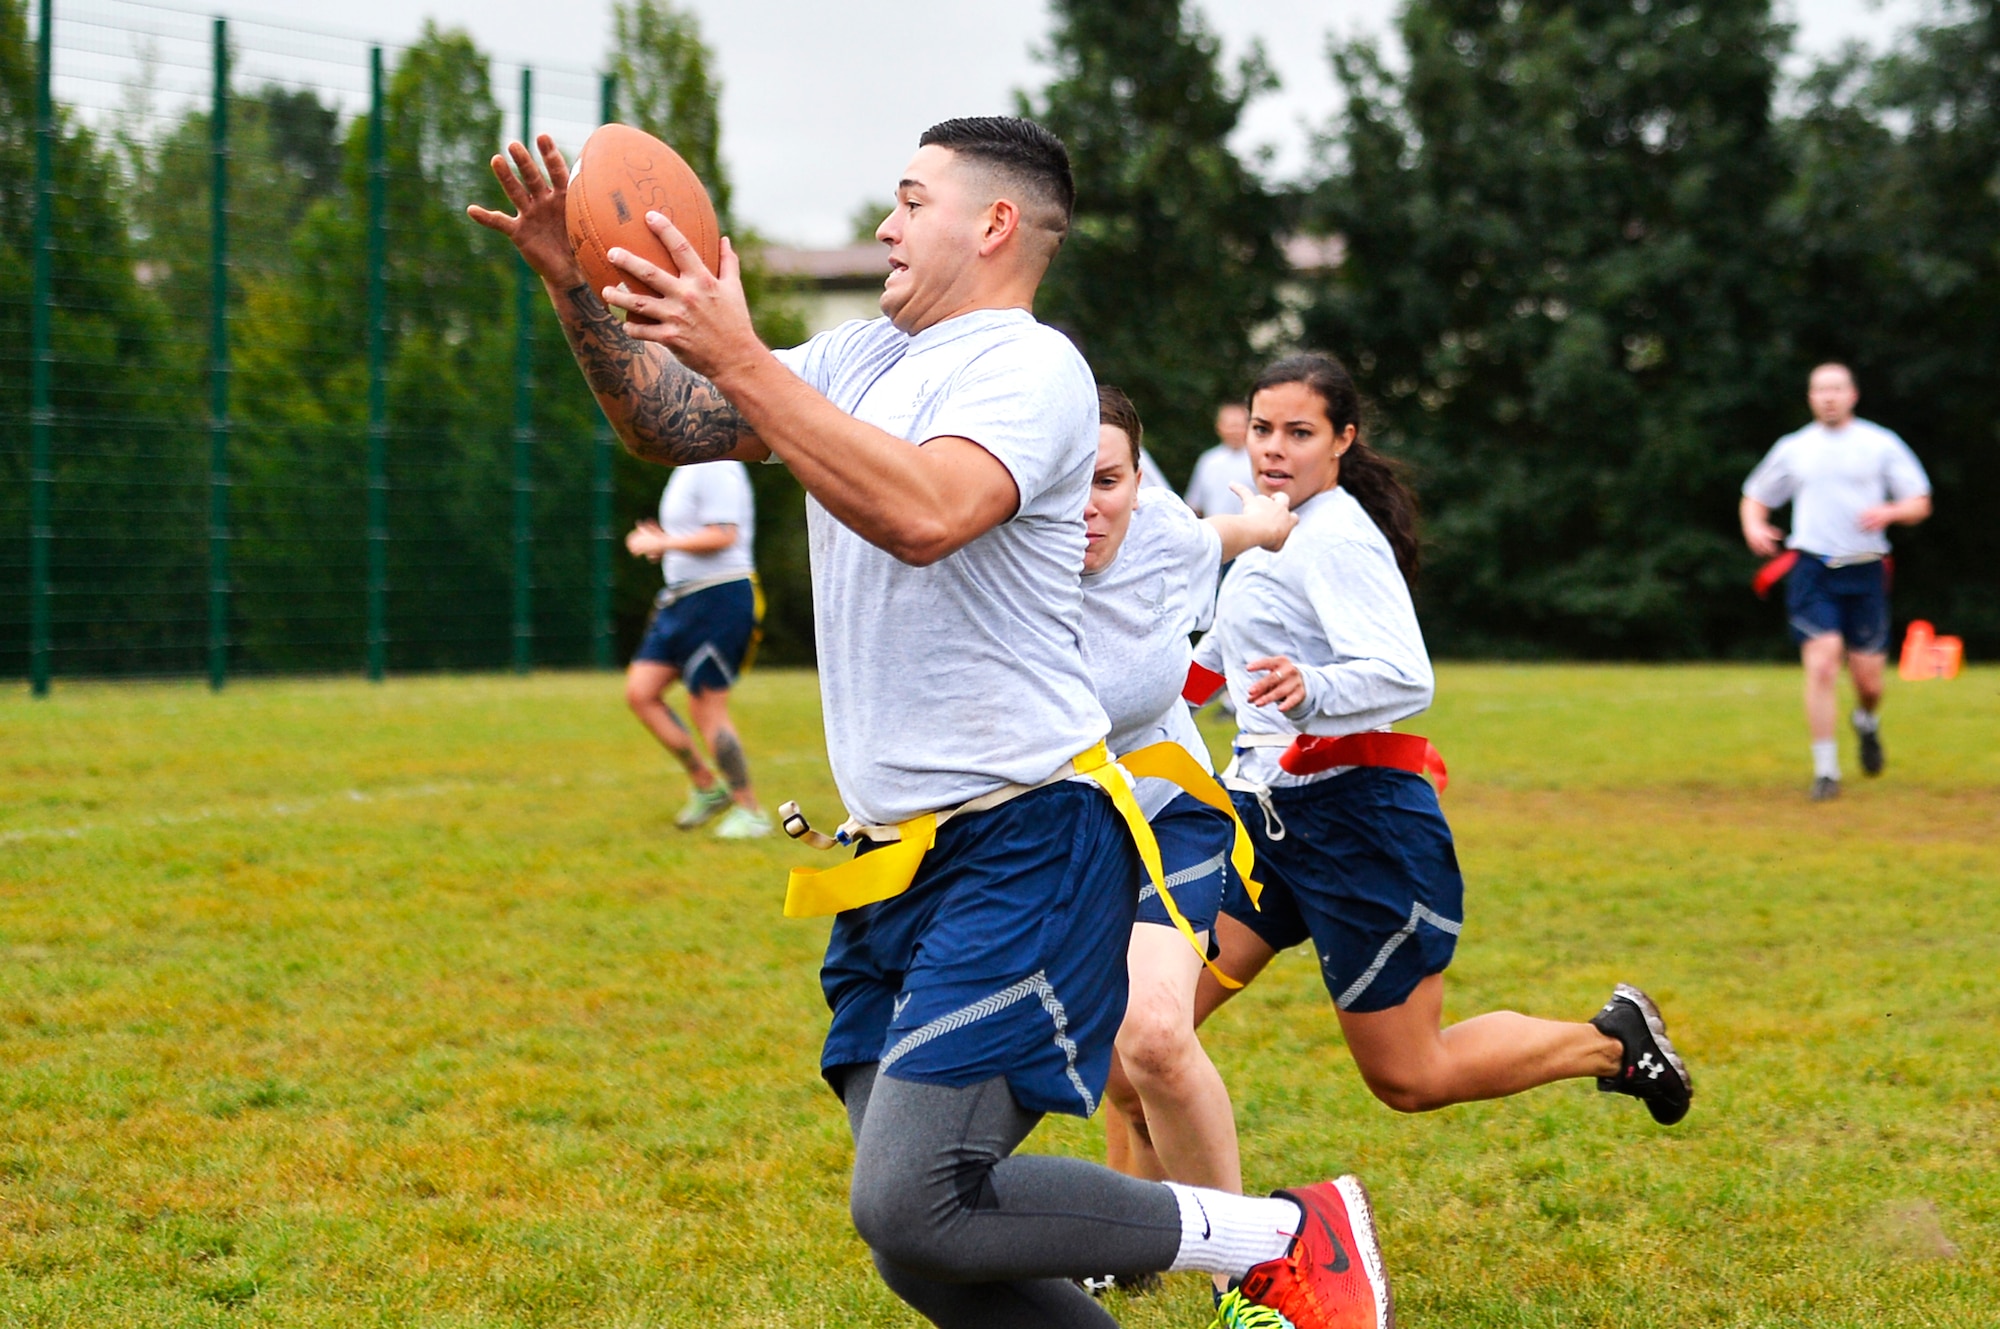 U.S. Airmen assigned to the 86th Airlift Wing play flag football on Ramstein Air Base, Germany, Sept. 6, 2017. Airmen from all over the wing competed in the annual Commander’s Challenge resiliency day. (U.S. Air Force photo by Airman 1st Class Joshua Magbanua)